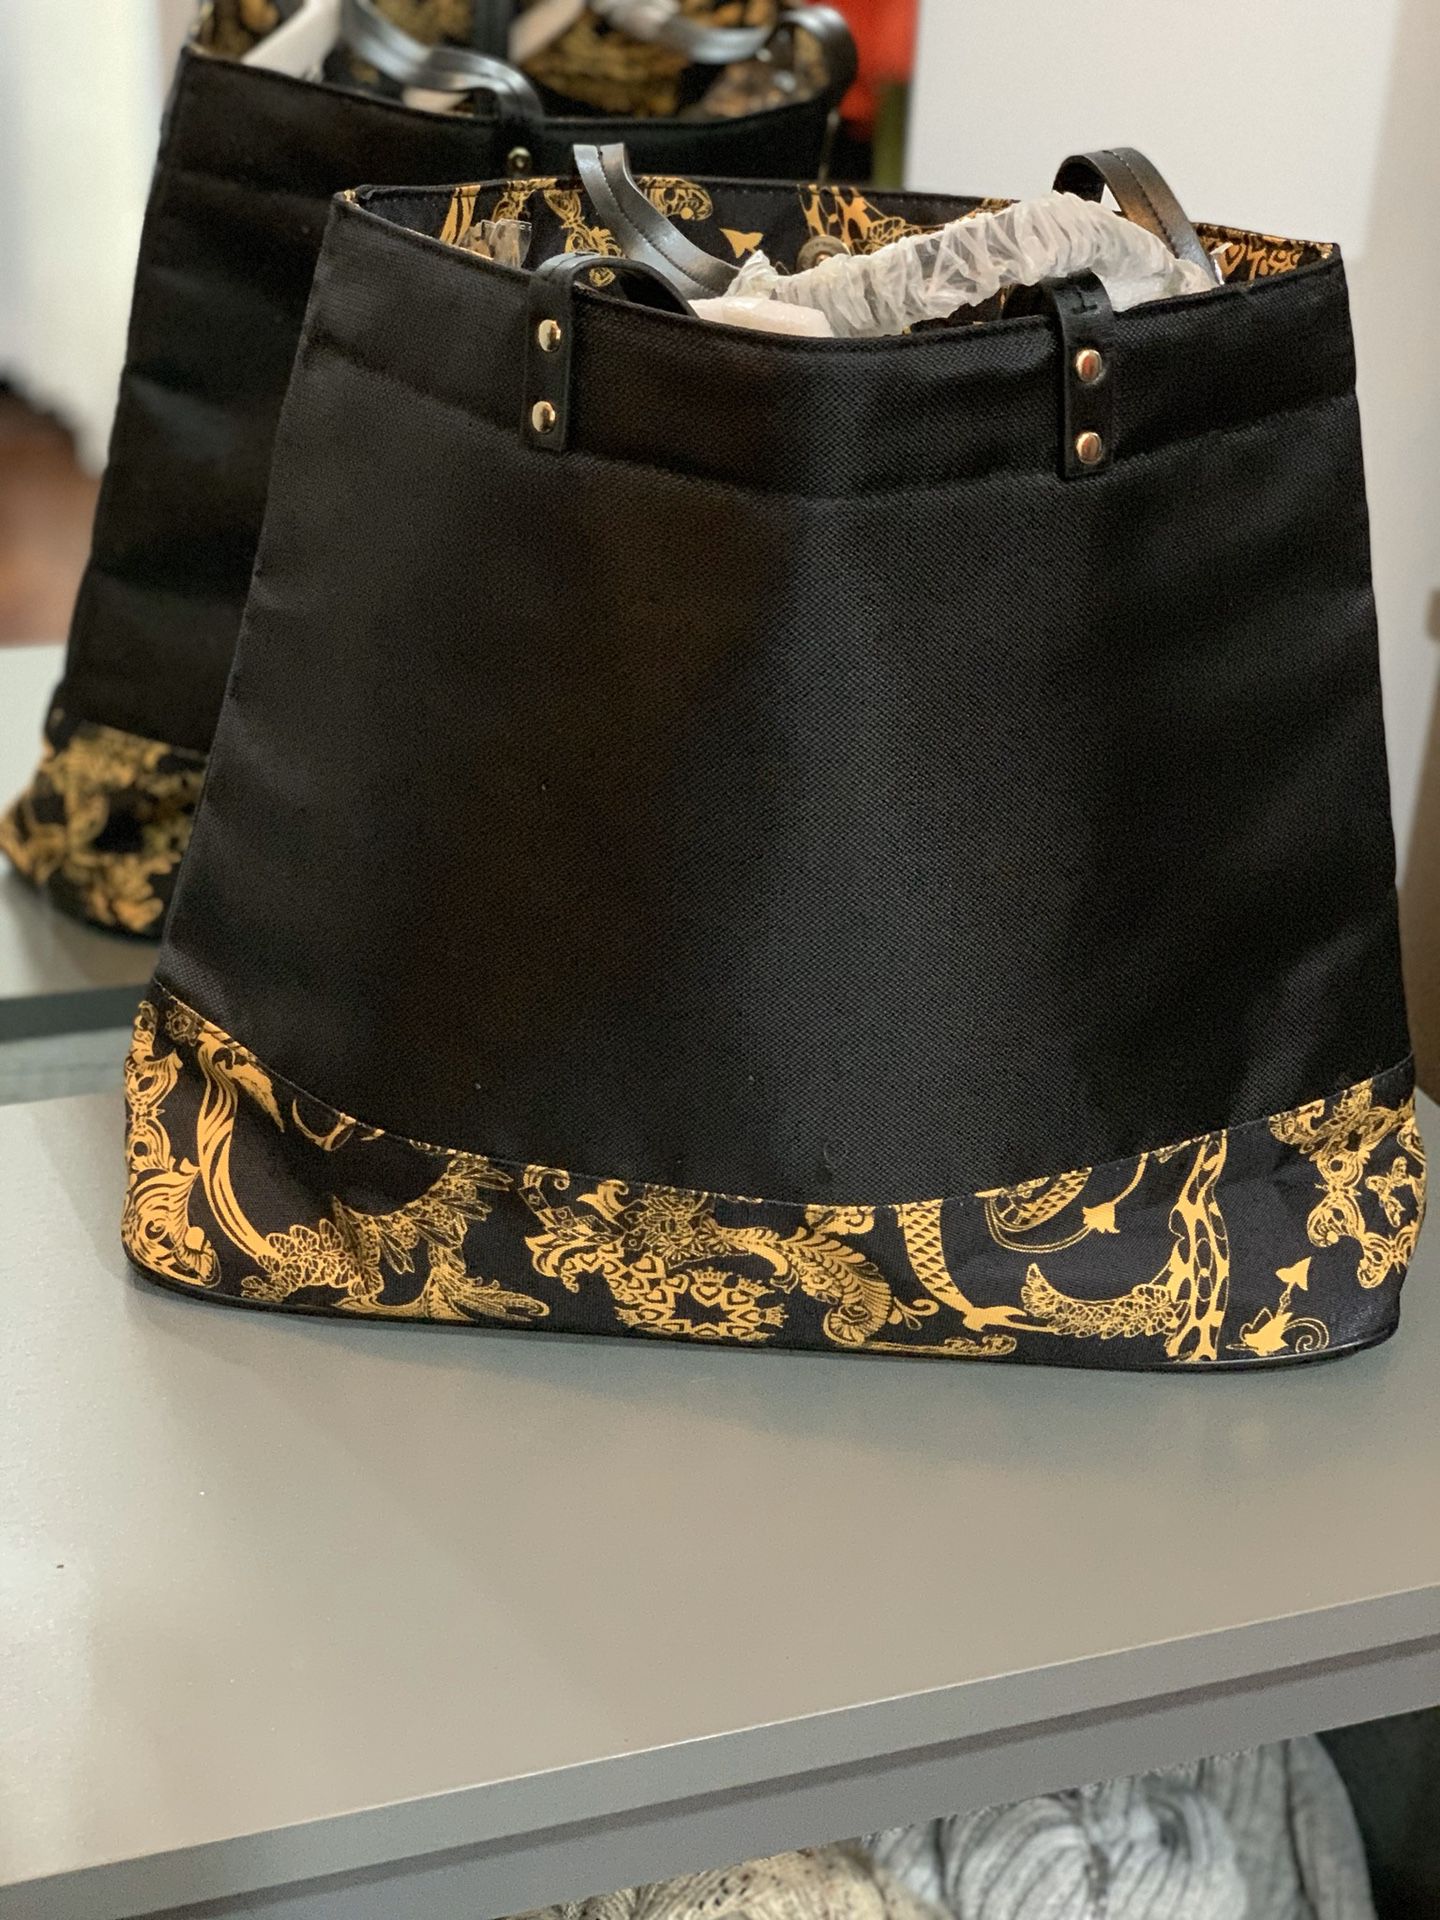 Authentic Versace bag with small bag